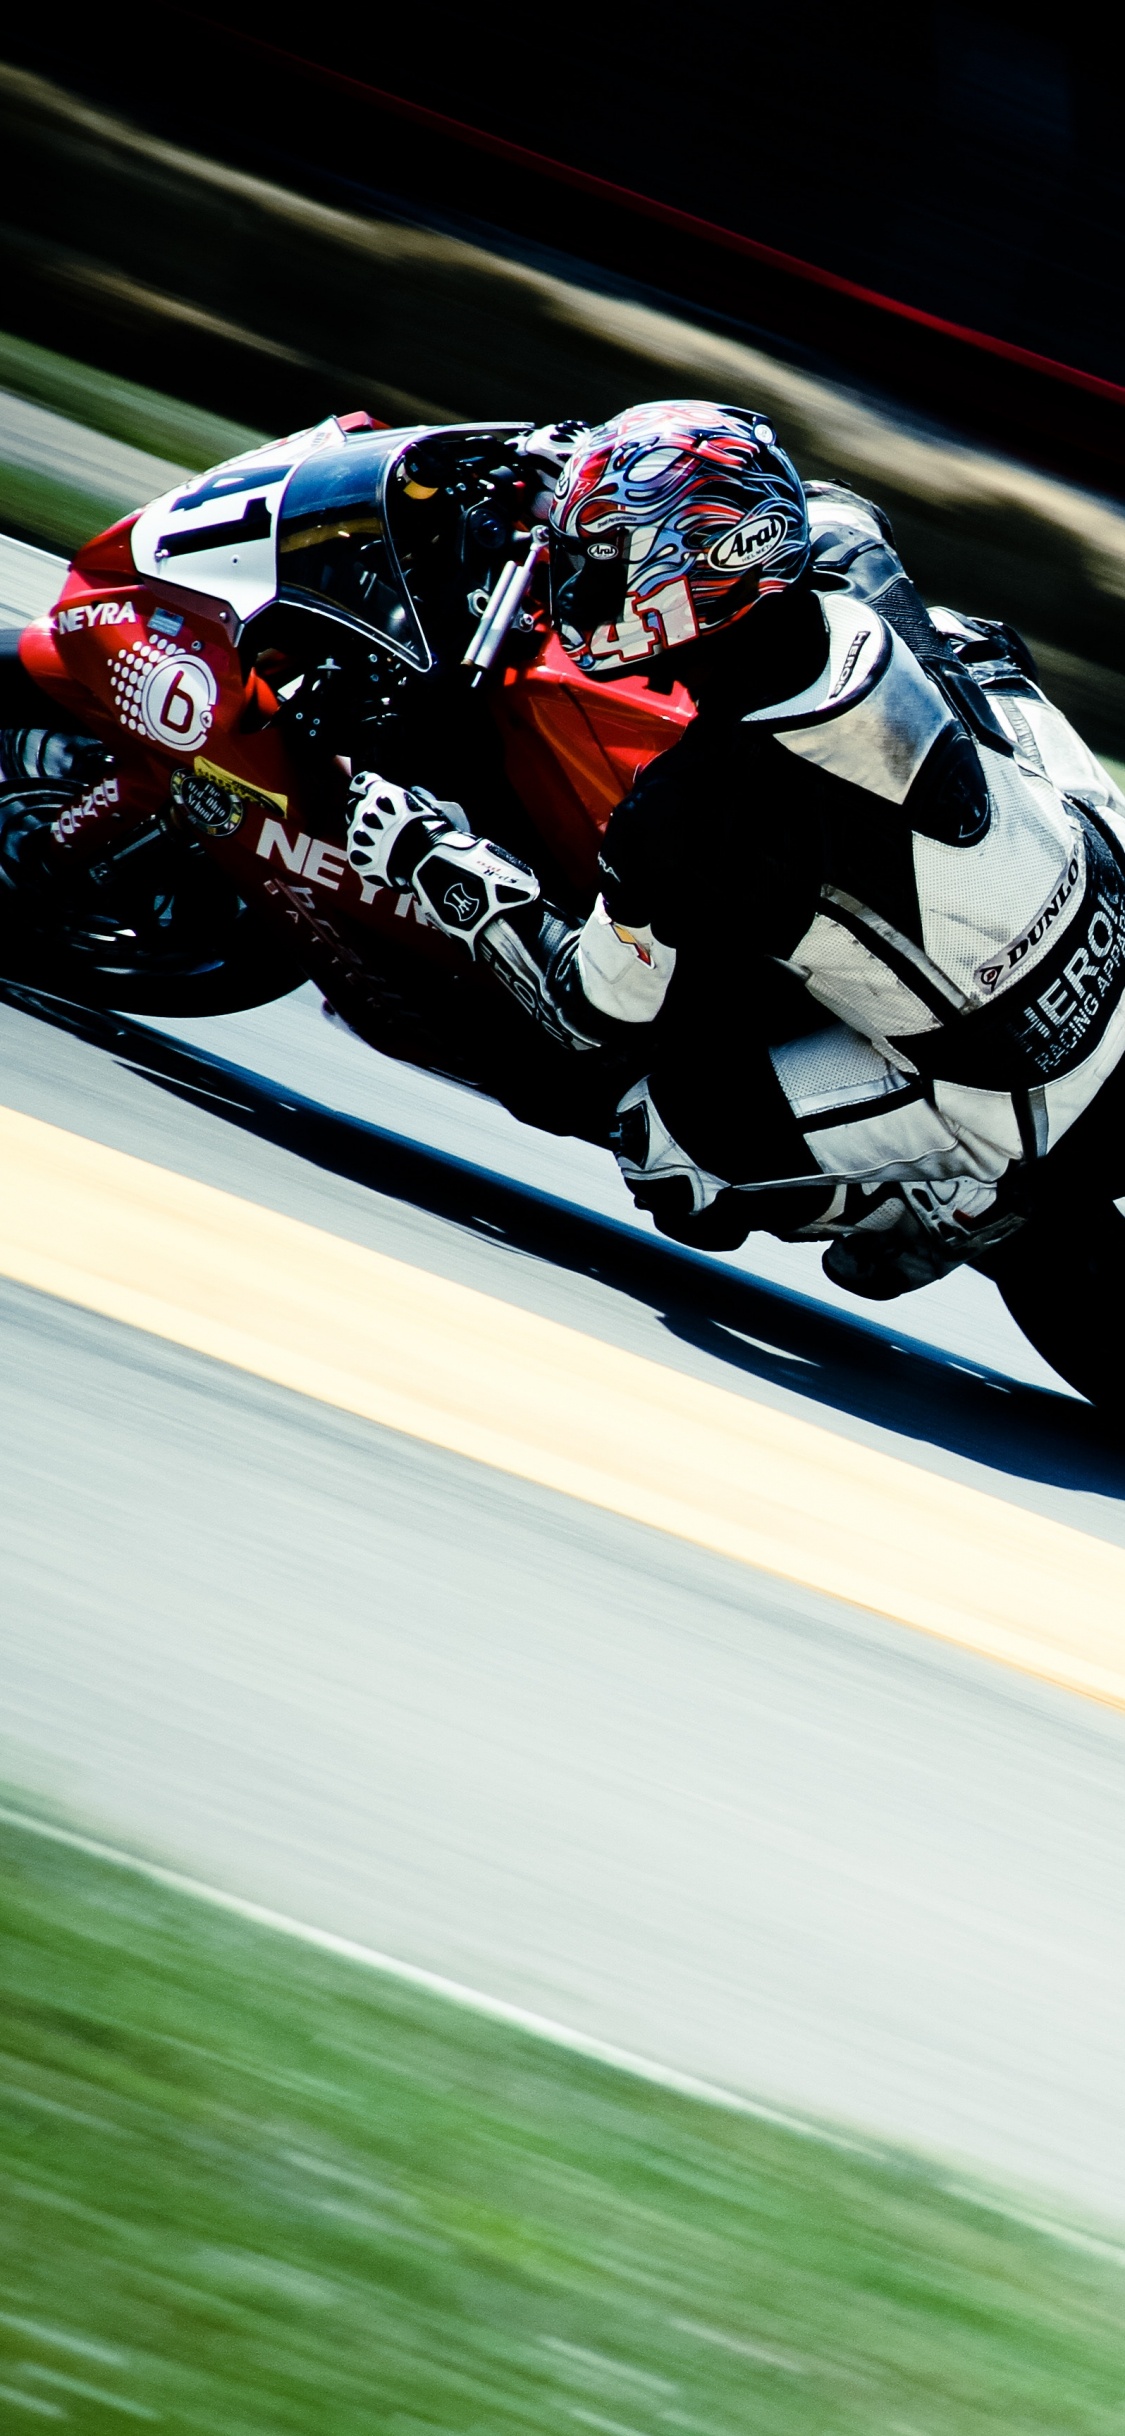 Man in Red and White Racing Suit Riding on Sports Bike. Wallpaper in 1125x2436 Resolution